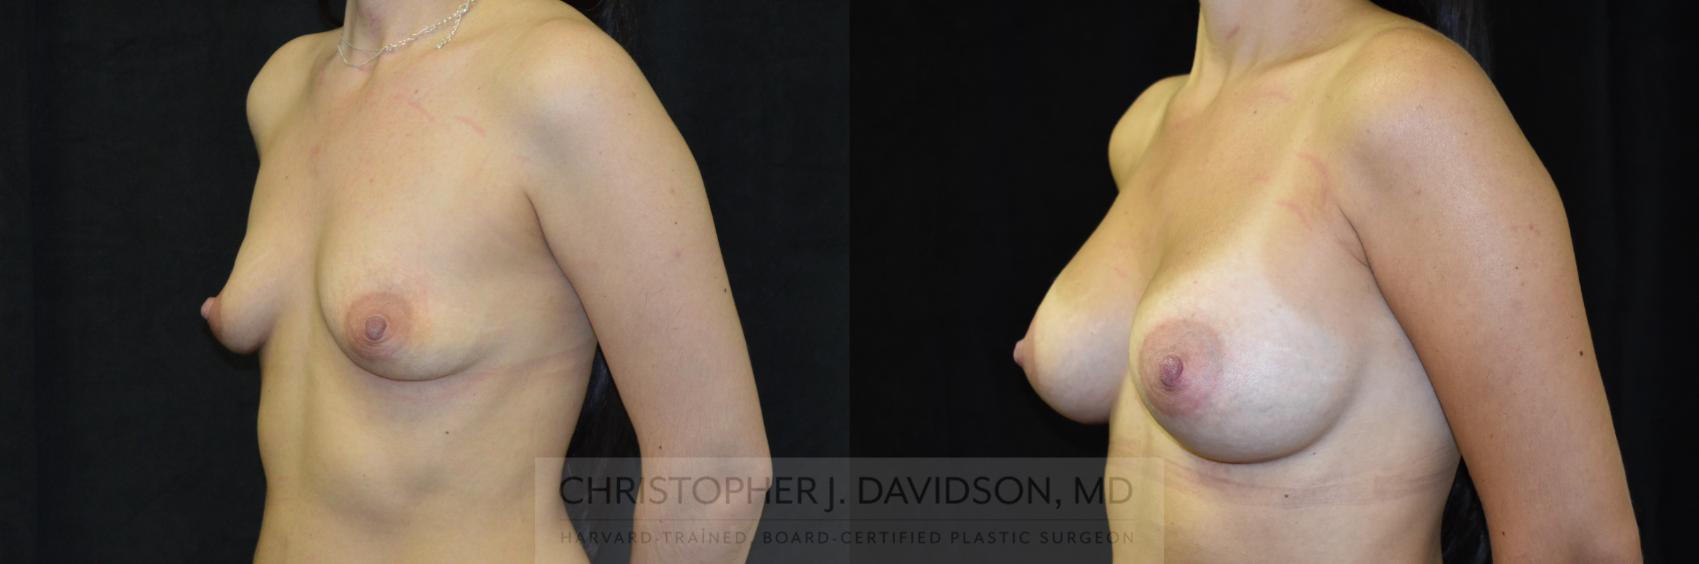 Breast Augmentation with Crisalix Preview Case 250 Before & After View #4 | Wellesley, MA | Christopher J. Davidson, MD